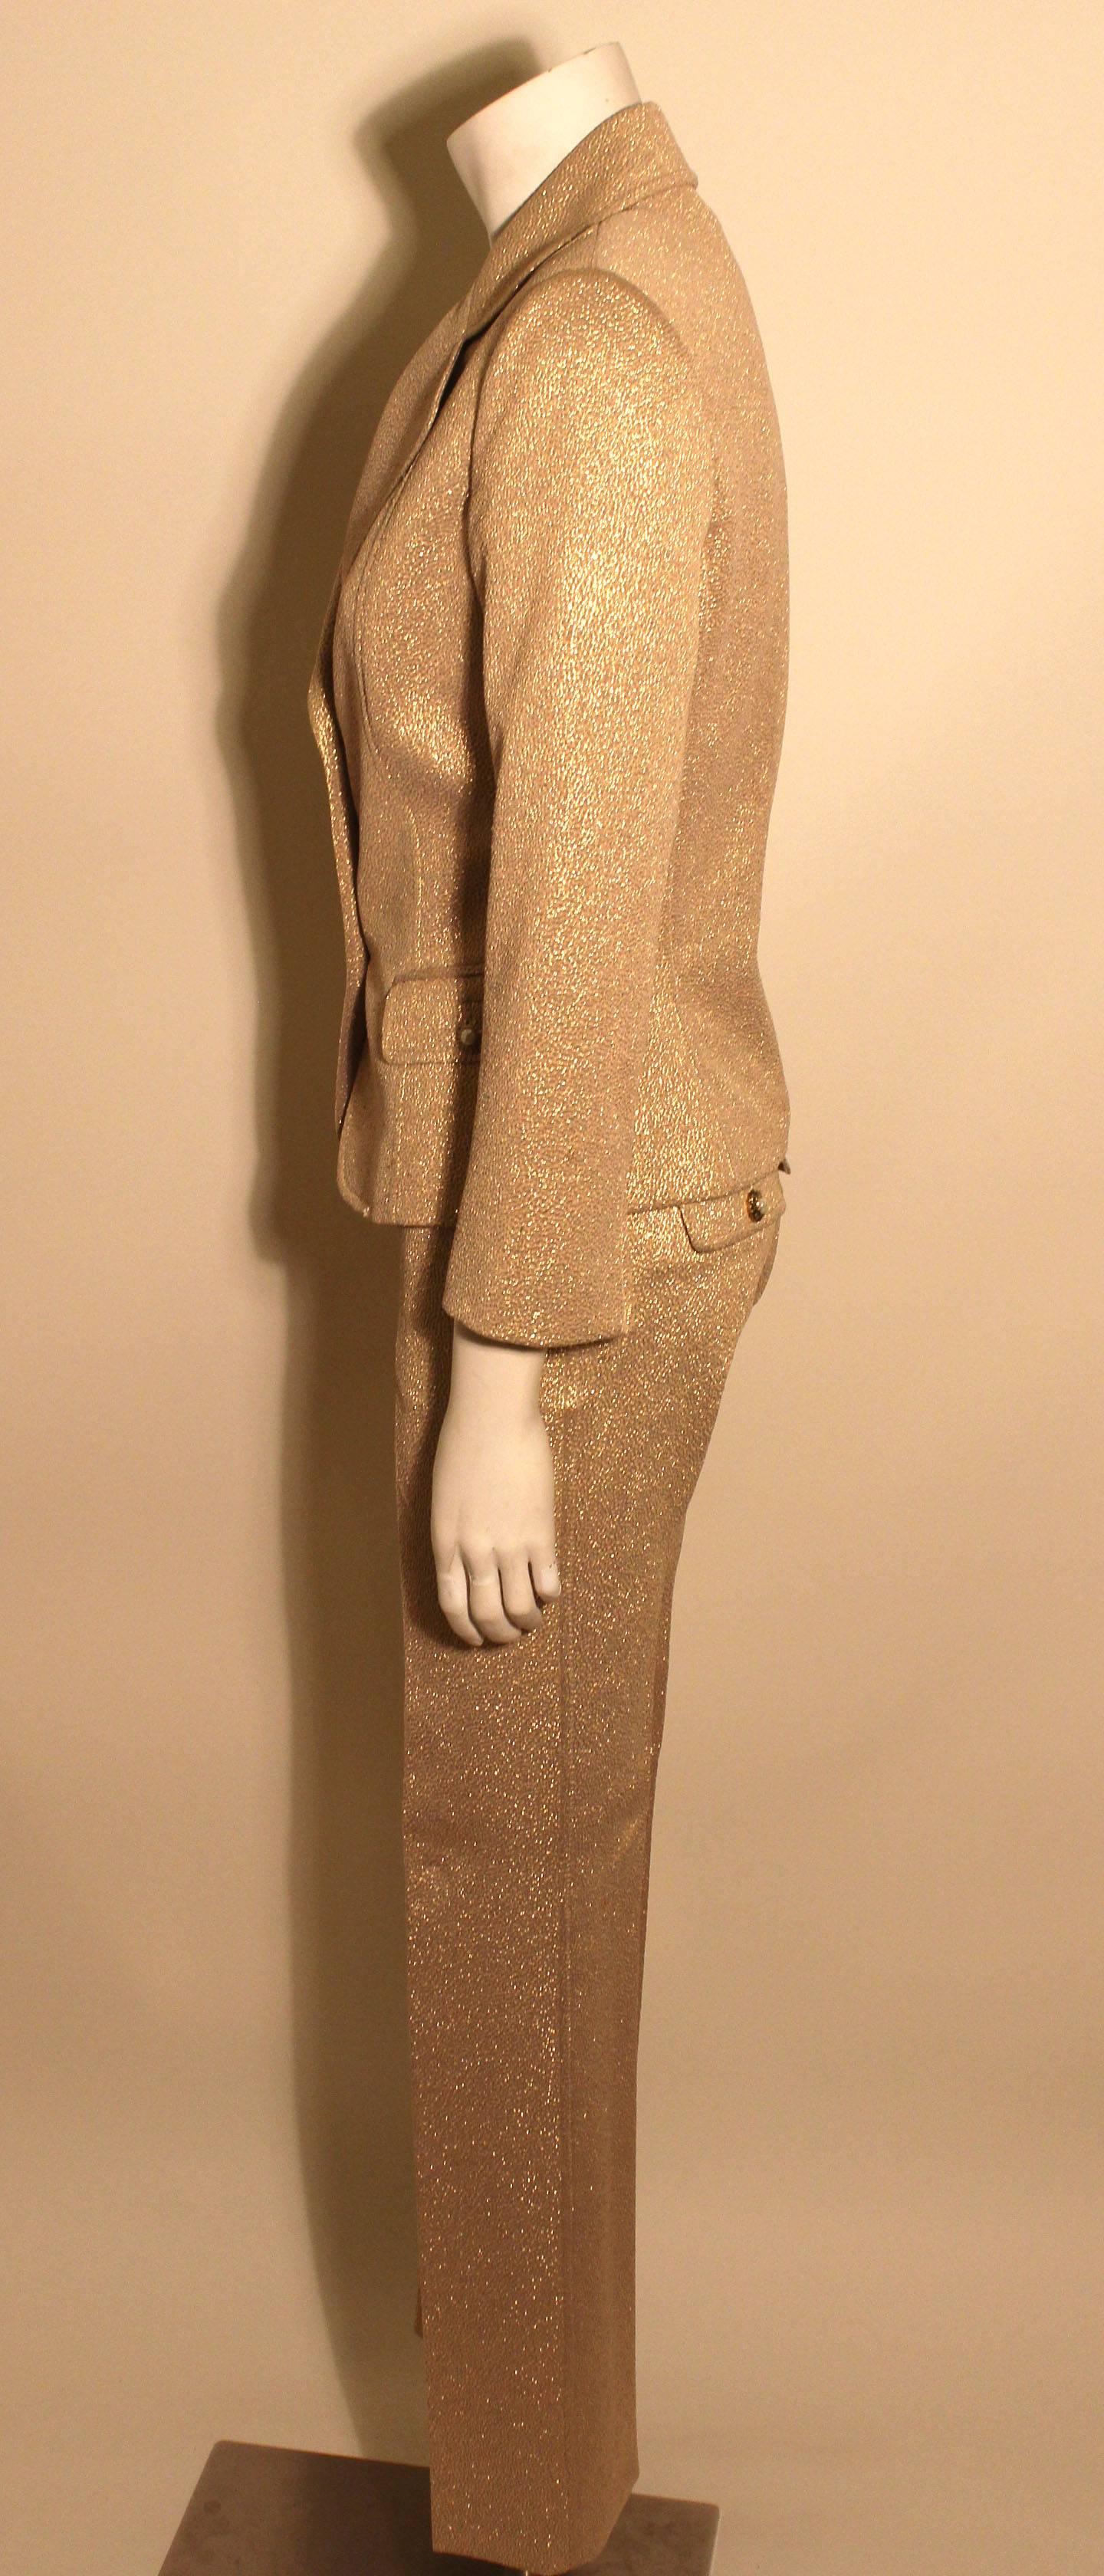 Dolce & Gabbana Metallic Gold Pant Suit In Excellent Condition For Sale In New York, NY